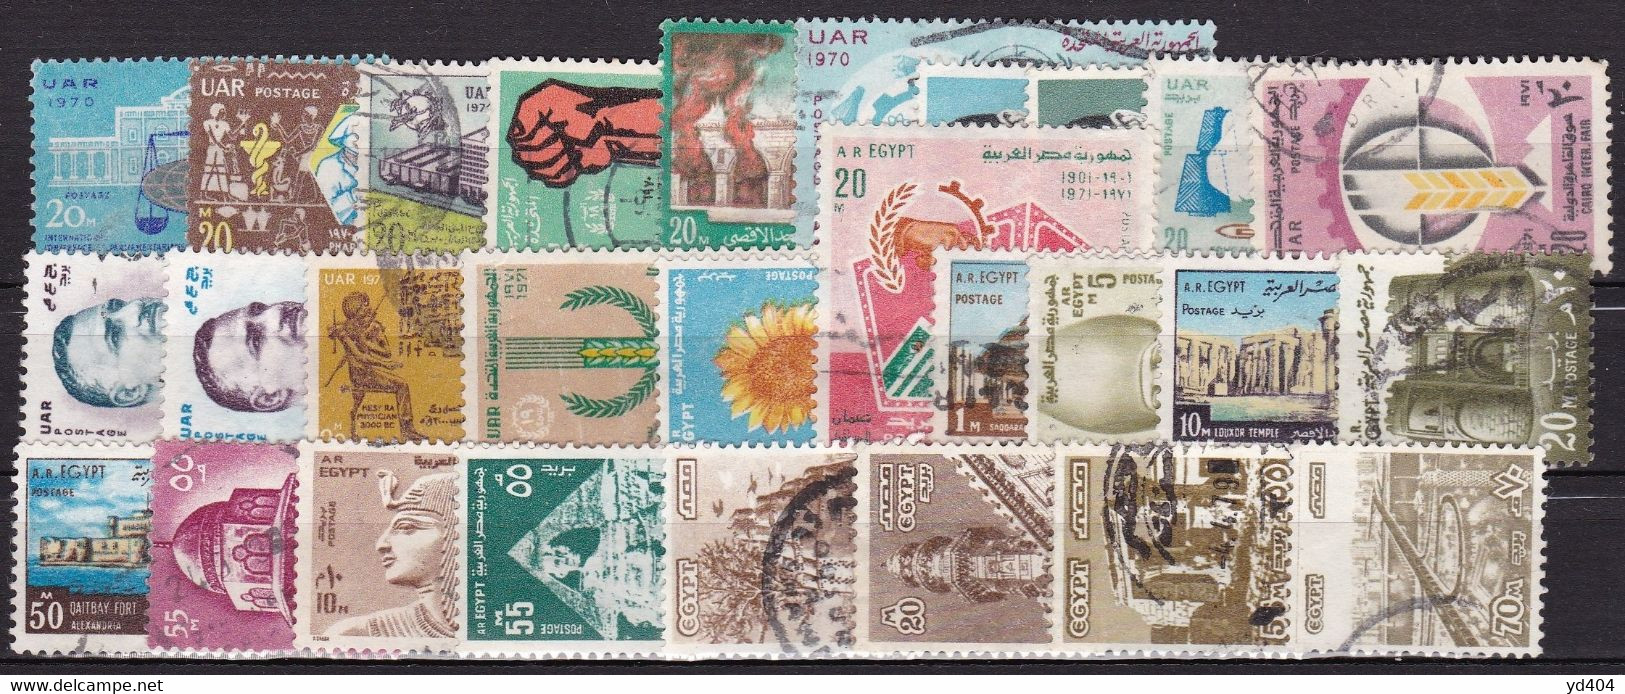 EG154 – EGYPTE – EGYPT - 1970→1979 - NICE COLLECTION – Y&T # 805→1092 USED 8,25 € - Gebraucht